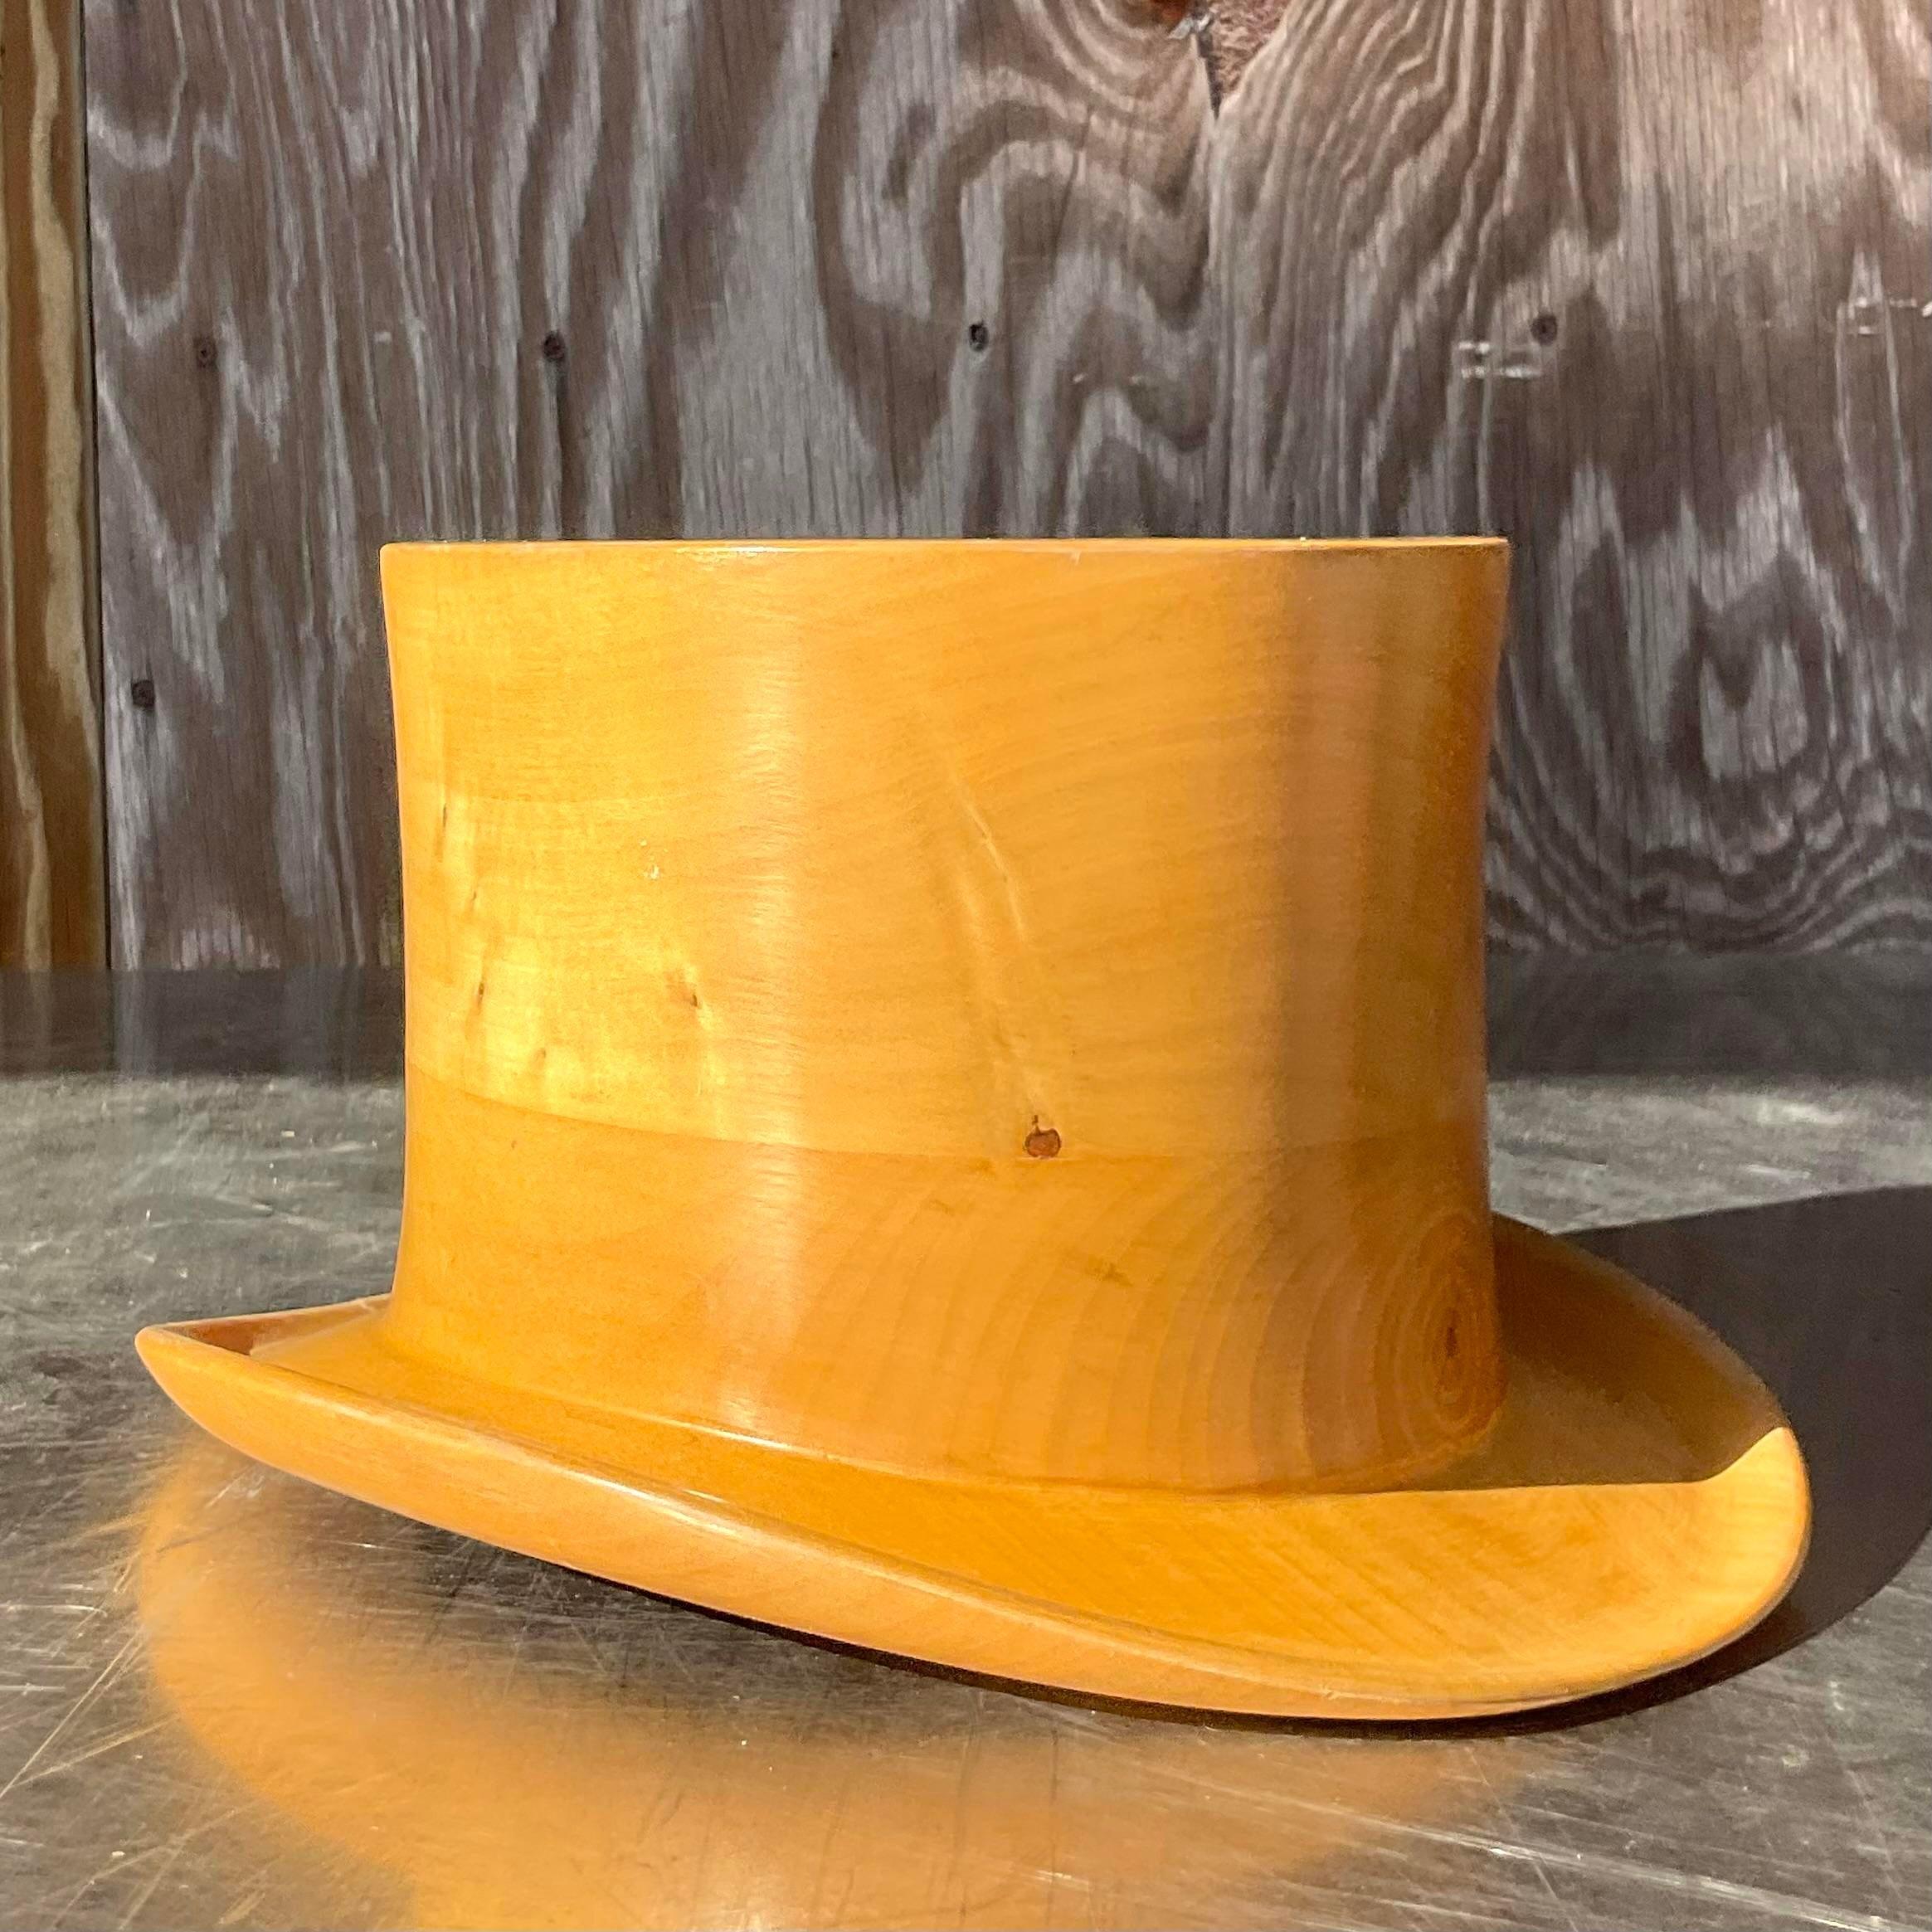 A fabulous vintage Boho wooden top hat. A chic hand tooled wood with beautiful wood grain detail. Made in Italy and marked inside. Acquired from a Palm Beach estate.